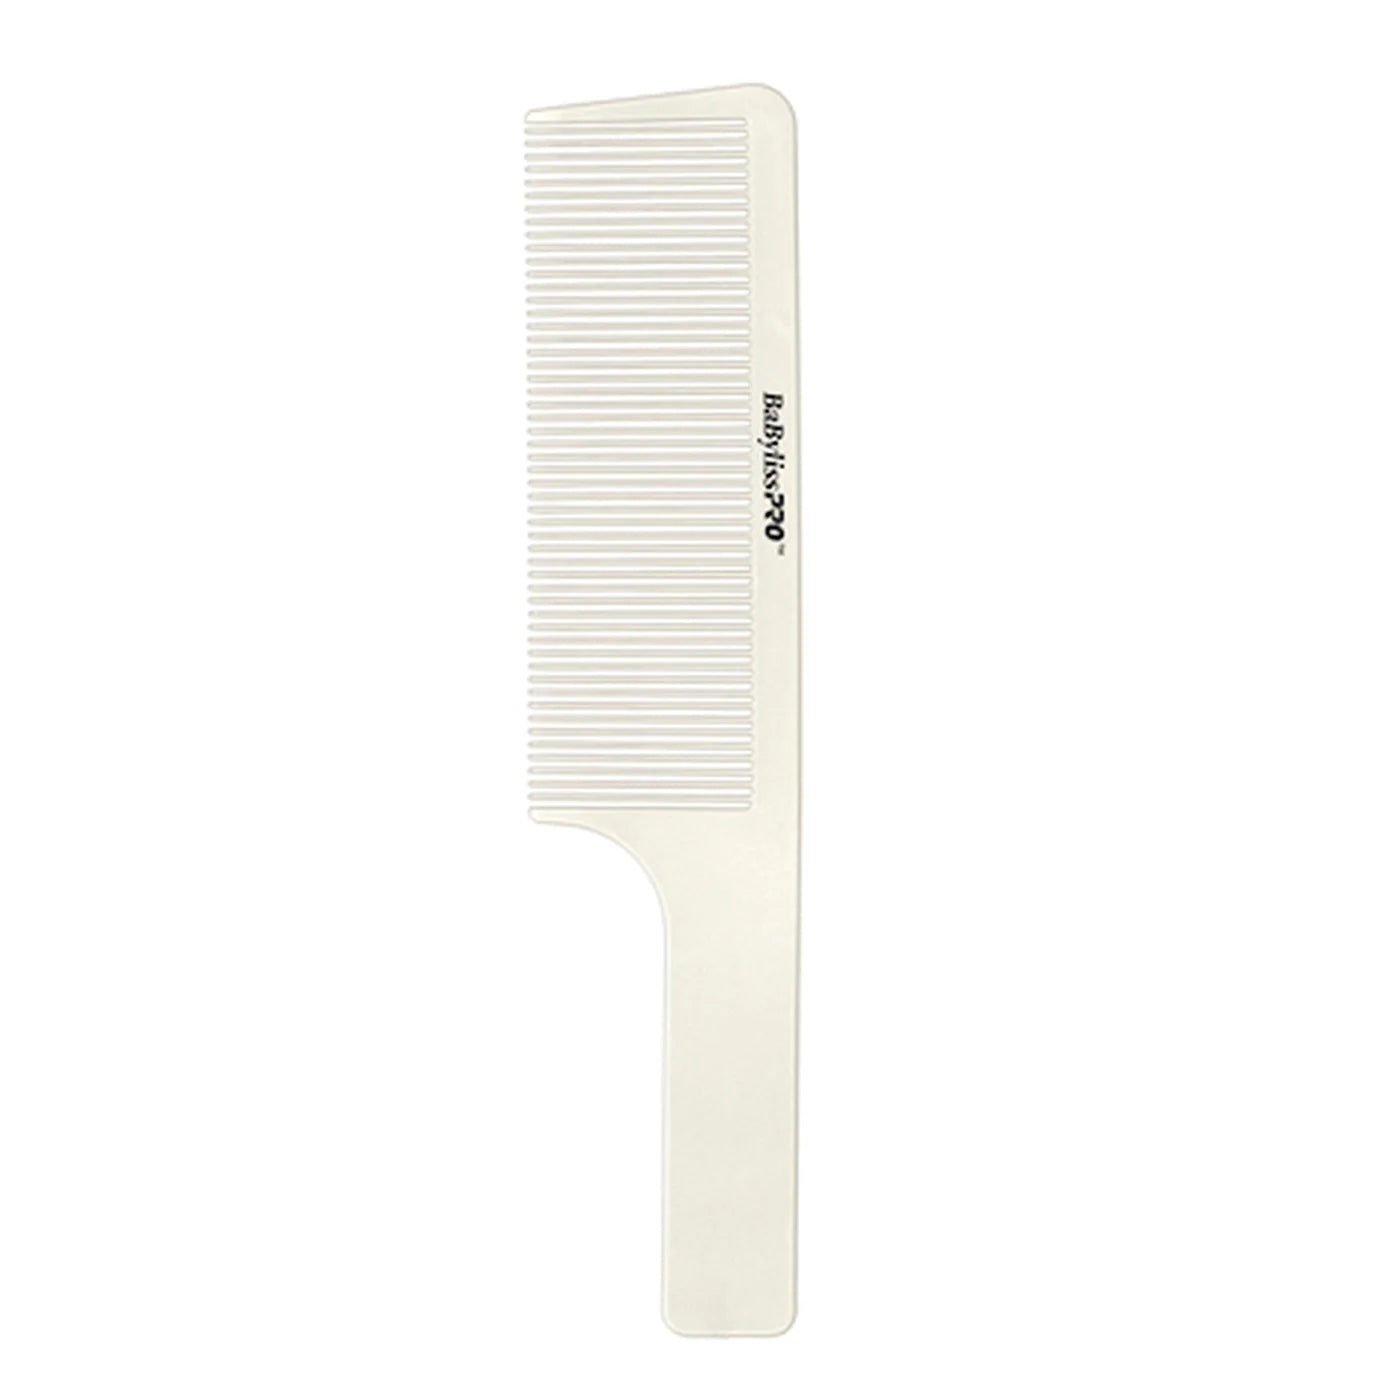 BaByliss Professional Barberology Barber Comb - White